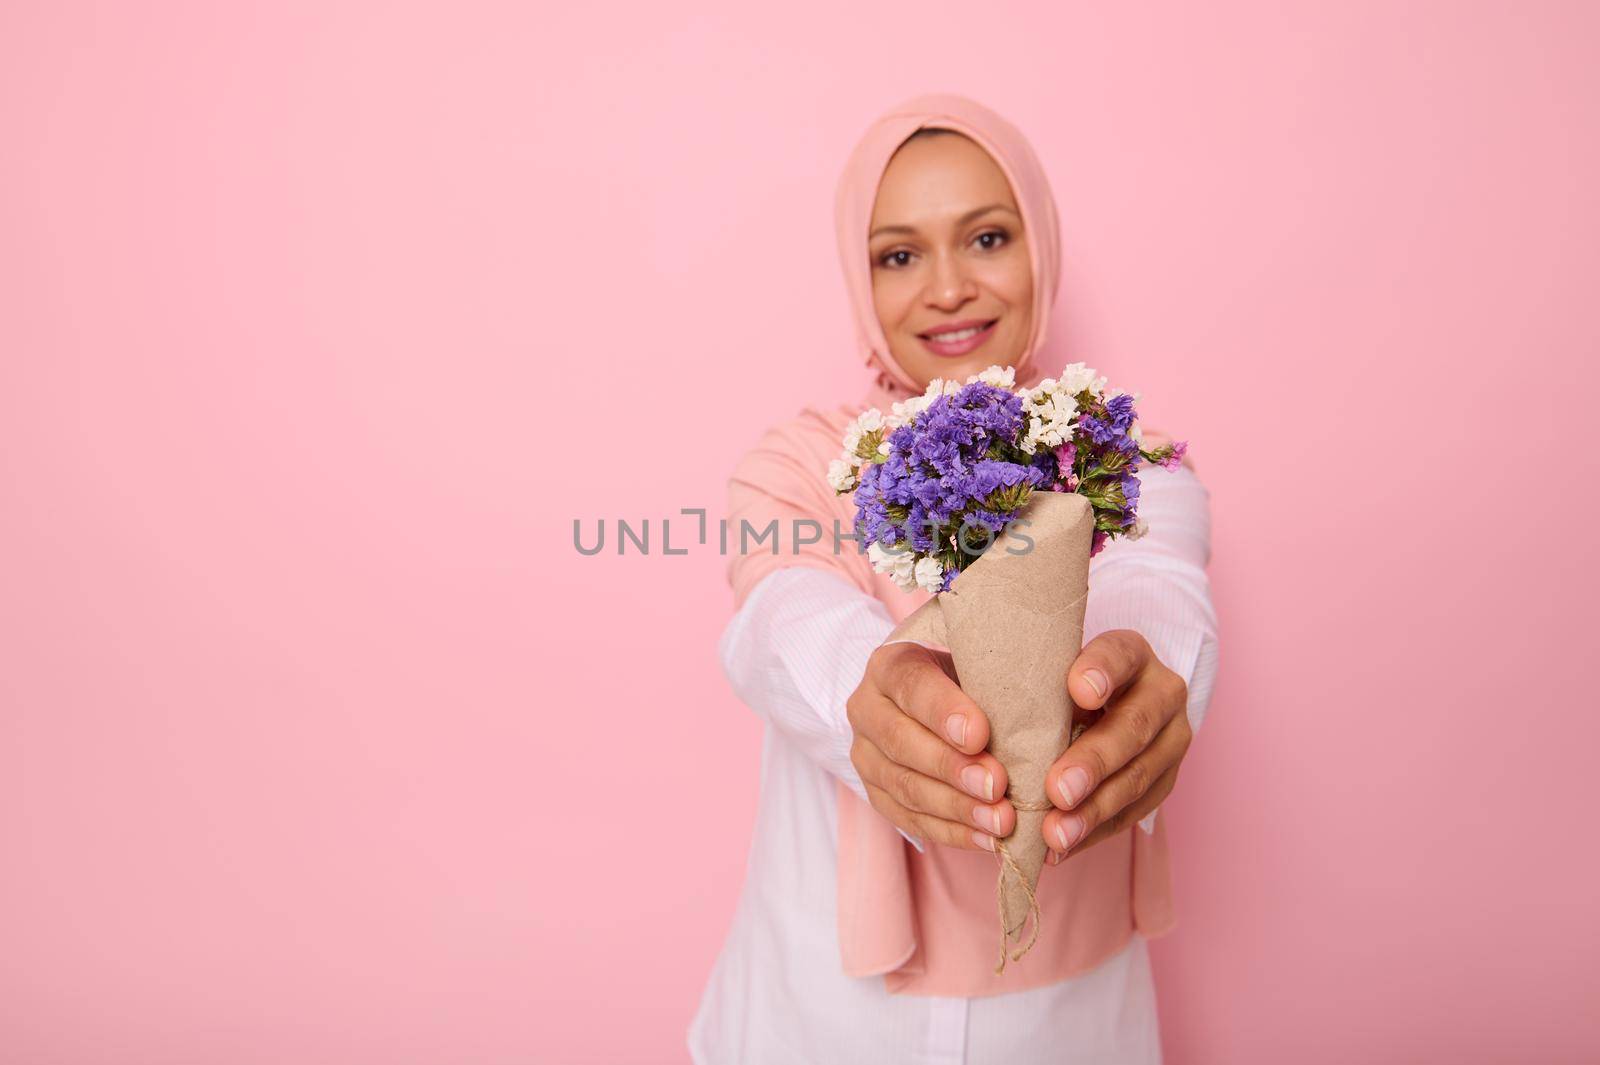 Focus on a beautiful simple bouquet of meadow wildflowers in purple tones, wrapped in brown craft paper in the hands of an attractive smiling Muslim woman wearing a hijab. Pink background copy space